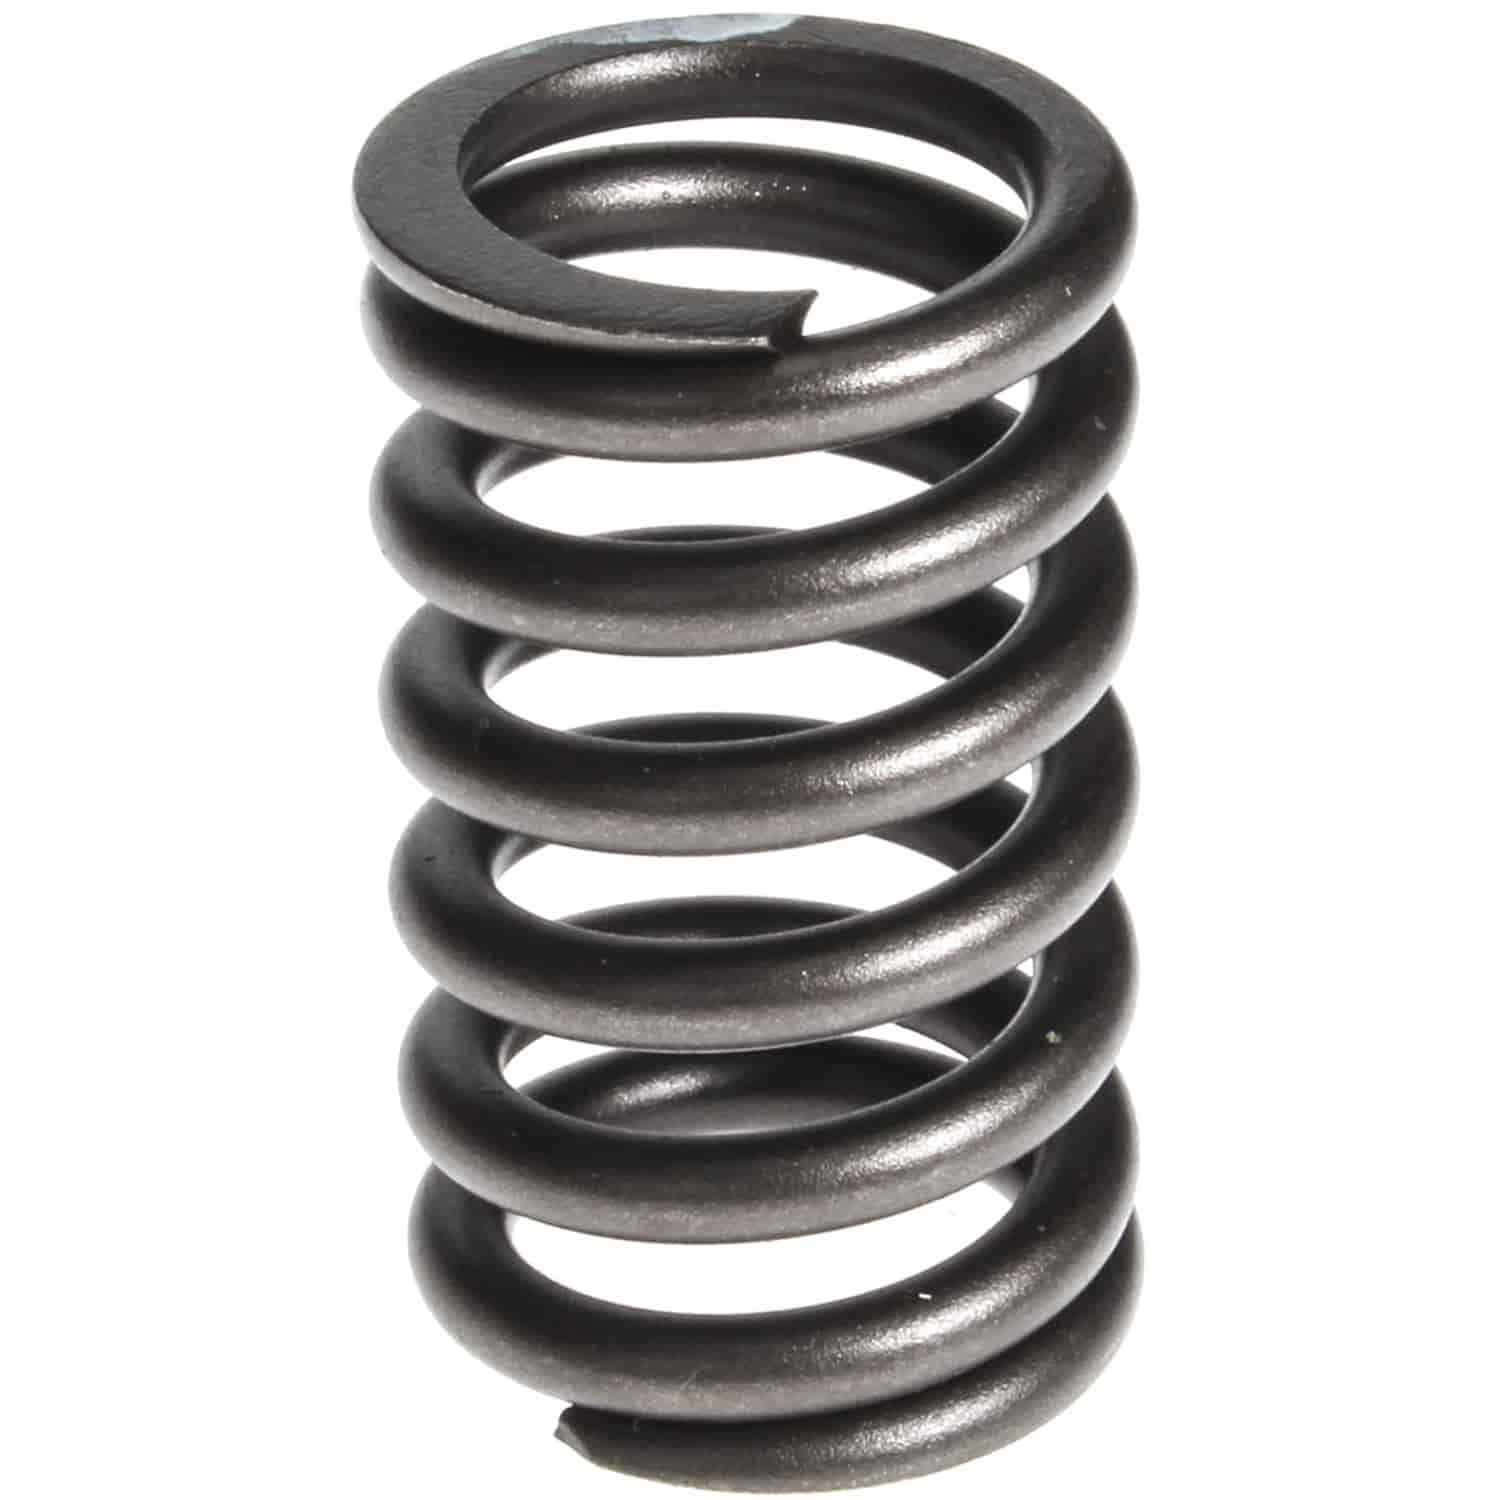 Valve Springs for Cummins B Series 4 and